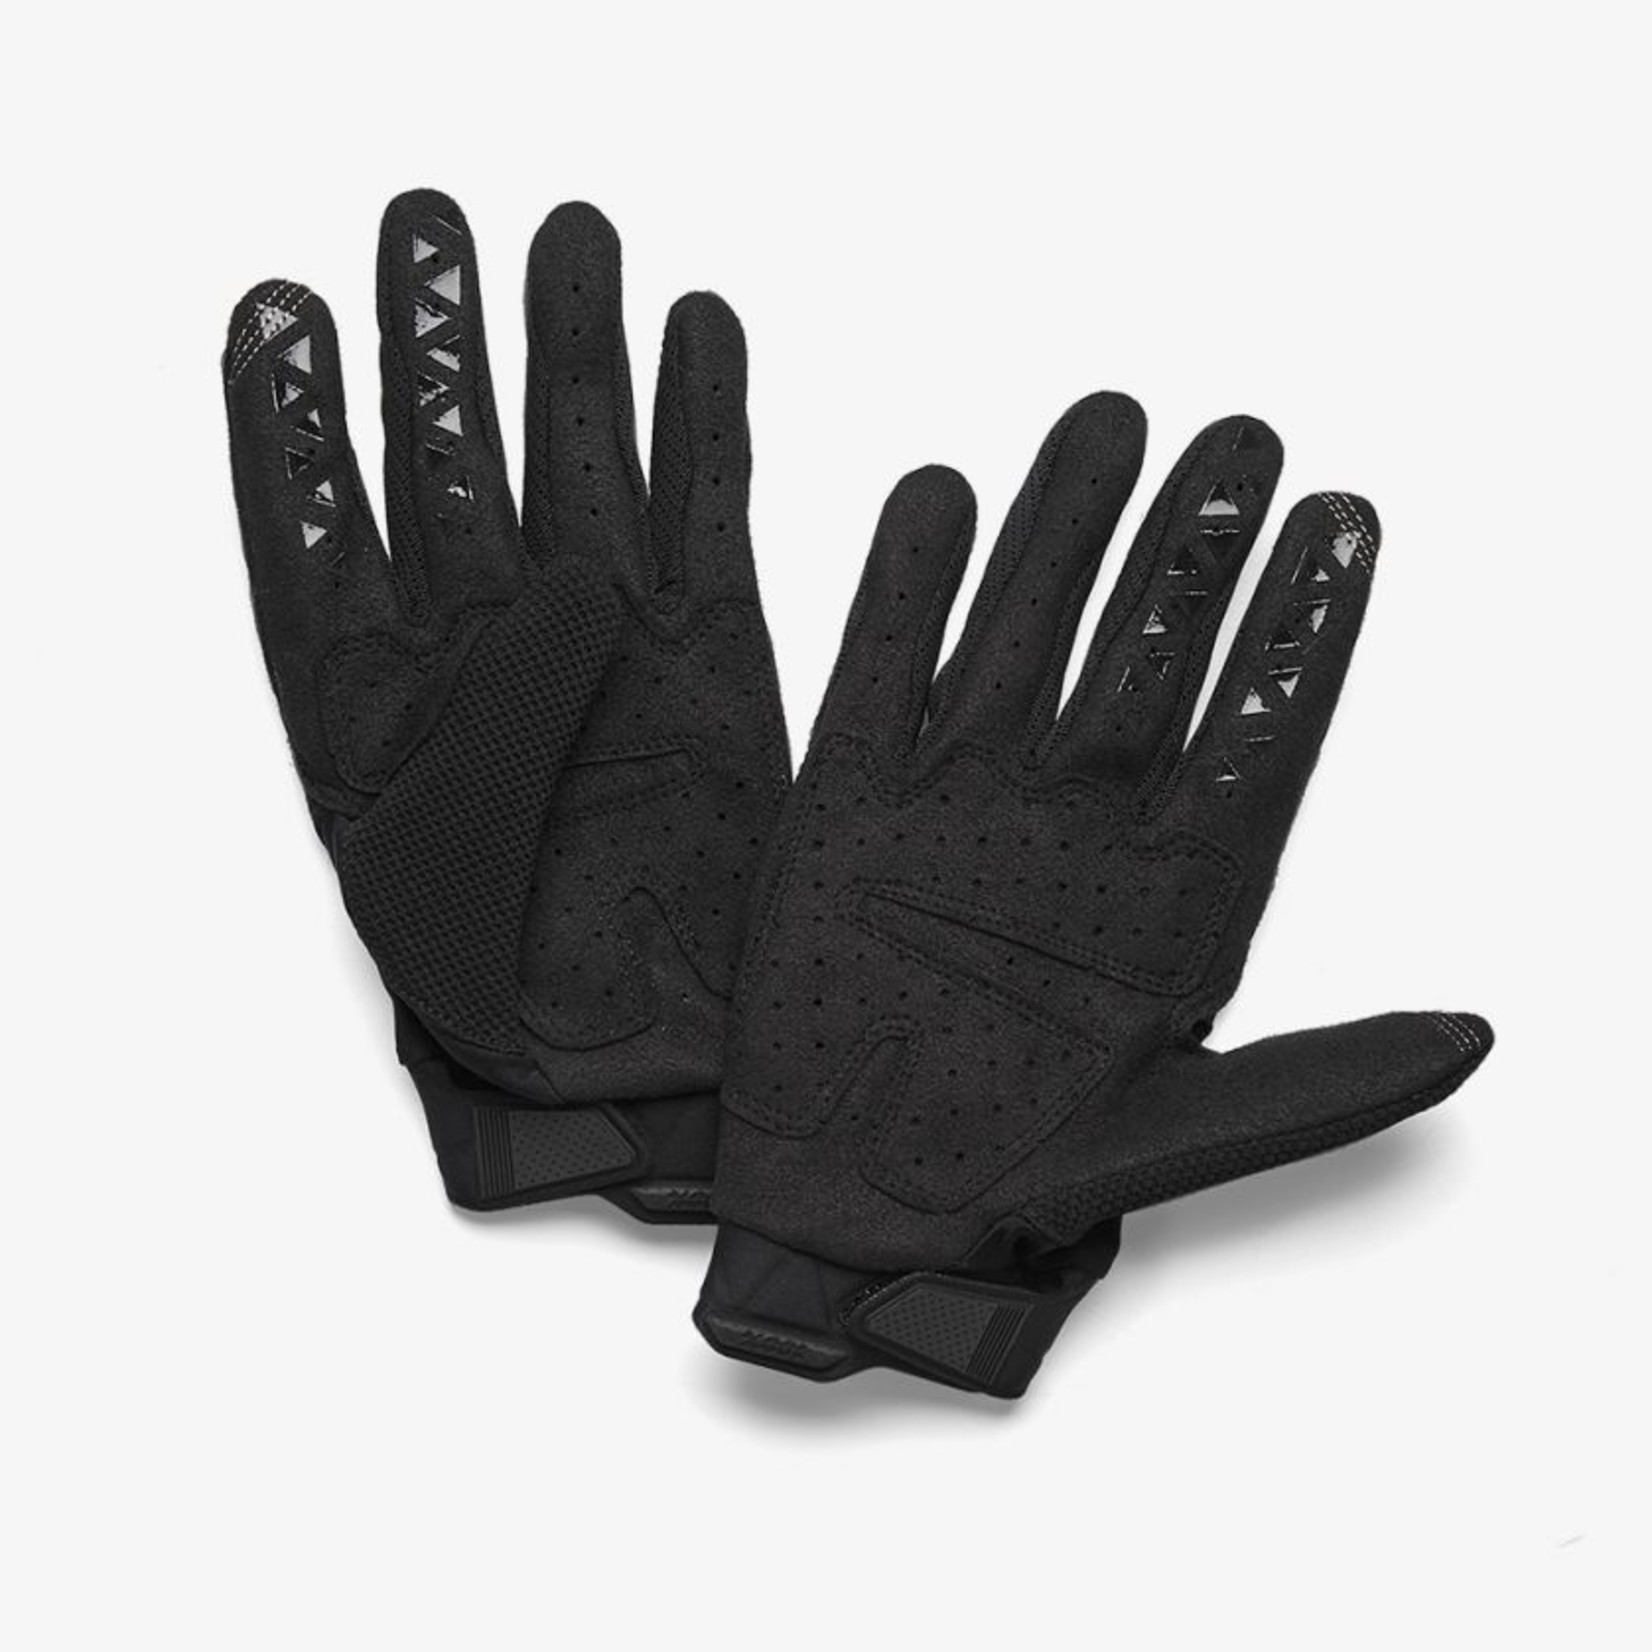 100% AIRMATIC Bike/Cycling Adjustable TPR Glove - Black/Charcoal Youth